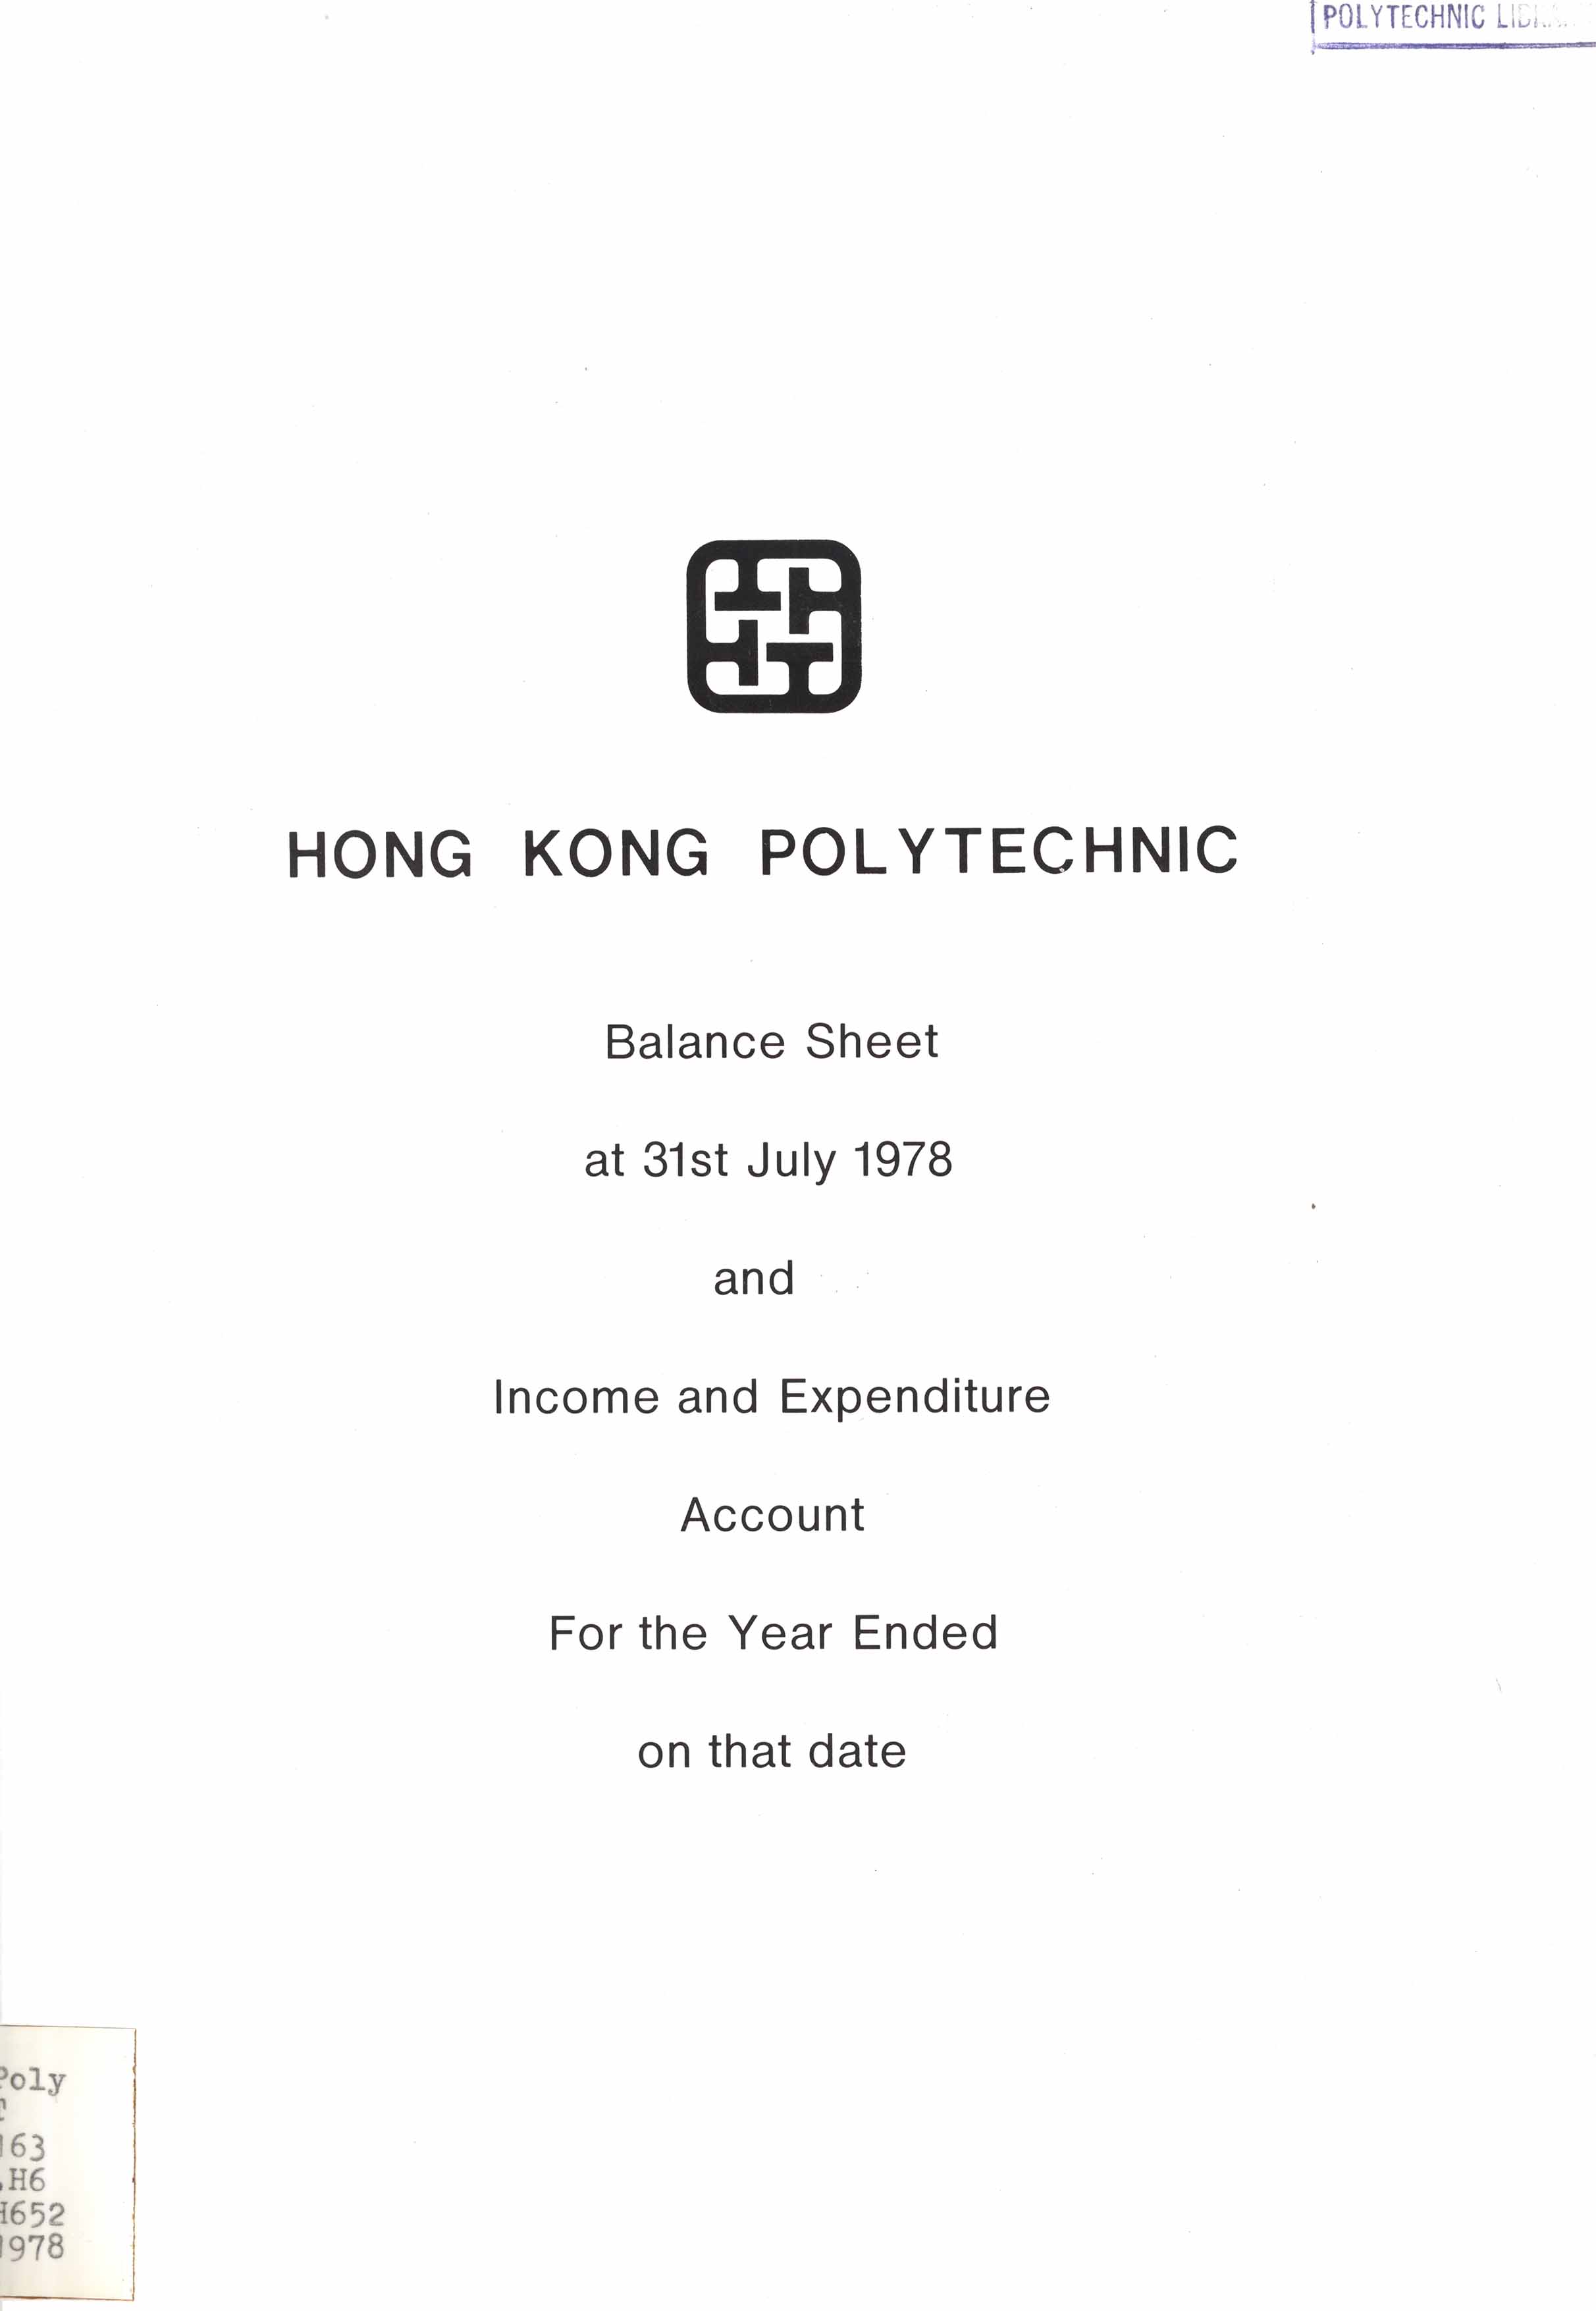 Balance sheet at 31st July 1978 and income and expenditure account for the year ended on that date